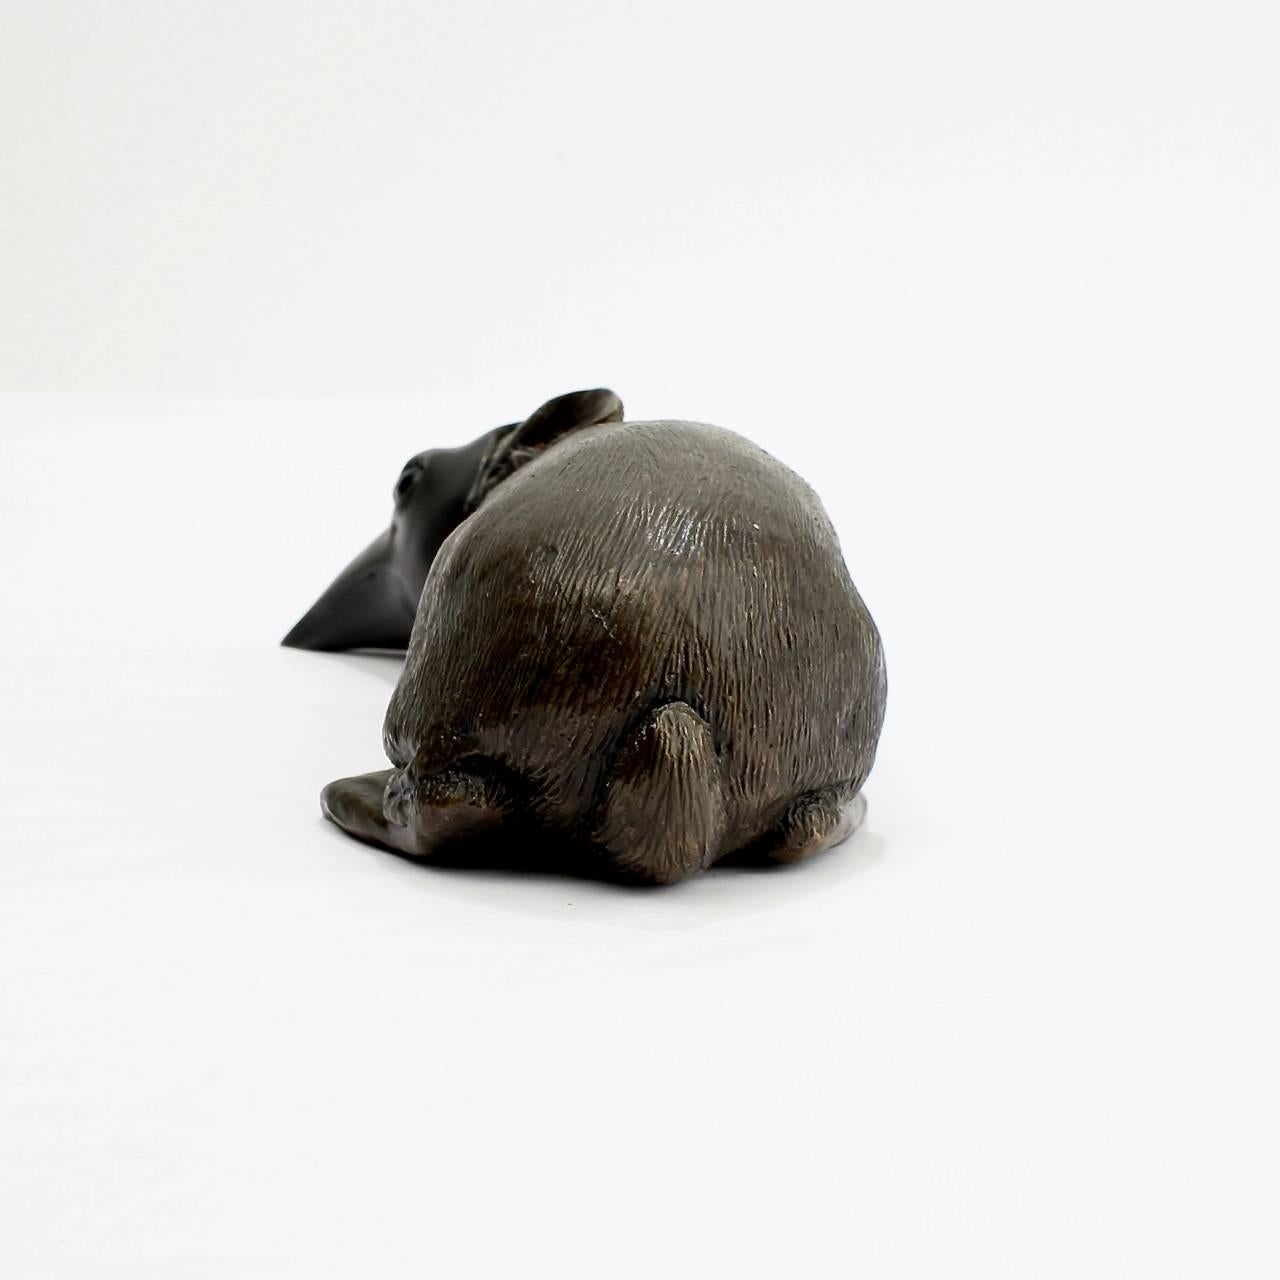 American Darla Jackson Baby Bunny with Crow's Mask Bronze Sculpture, 2015 For Sale